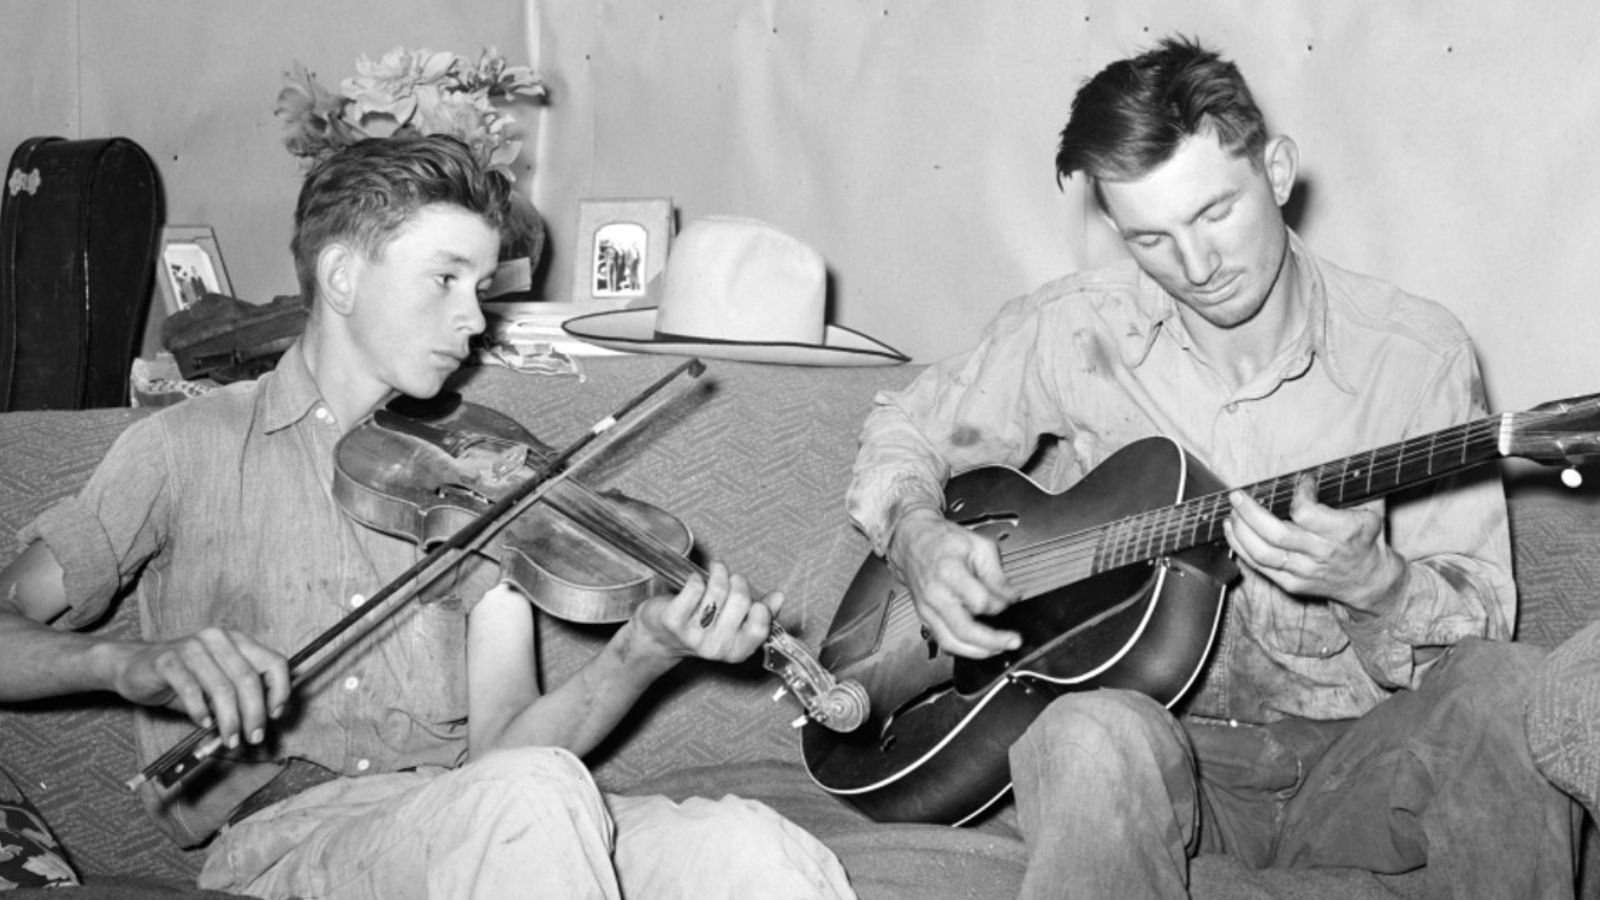 Black and white photo of two people with short, greased-back hair sitting on a couch and playing a violin and a guitar.